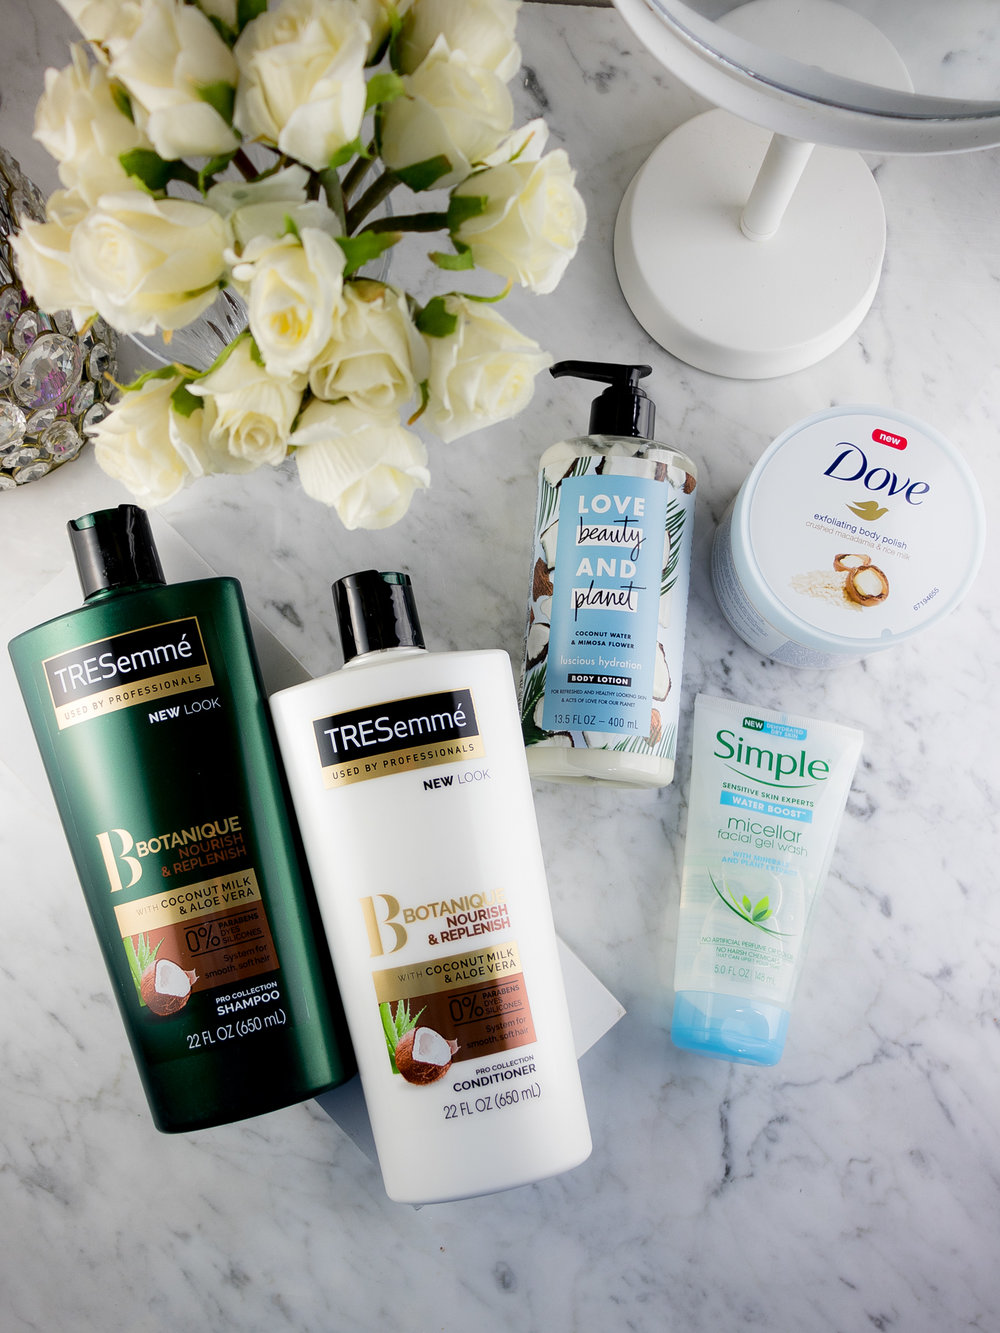 A NEW Personal Care Routine with Unilever Products